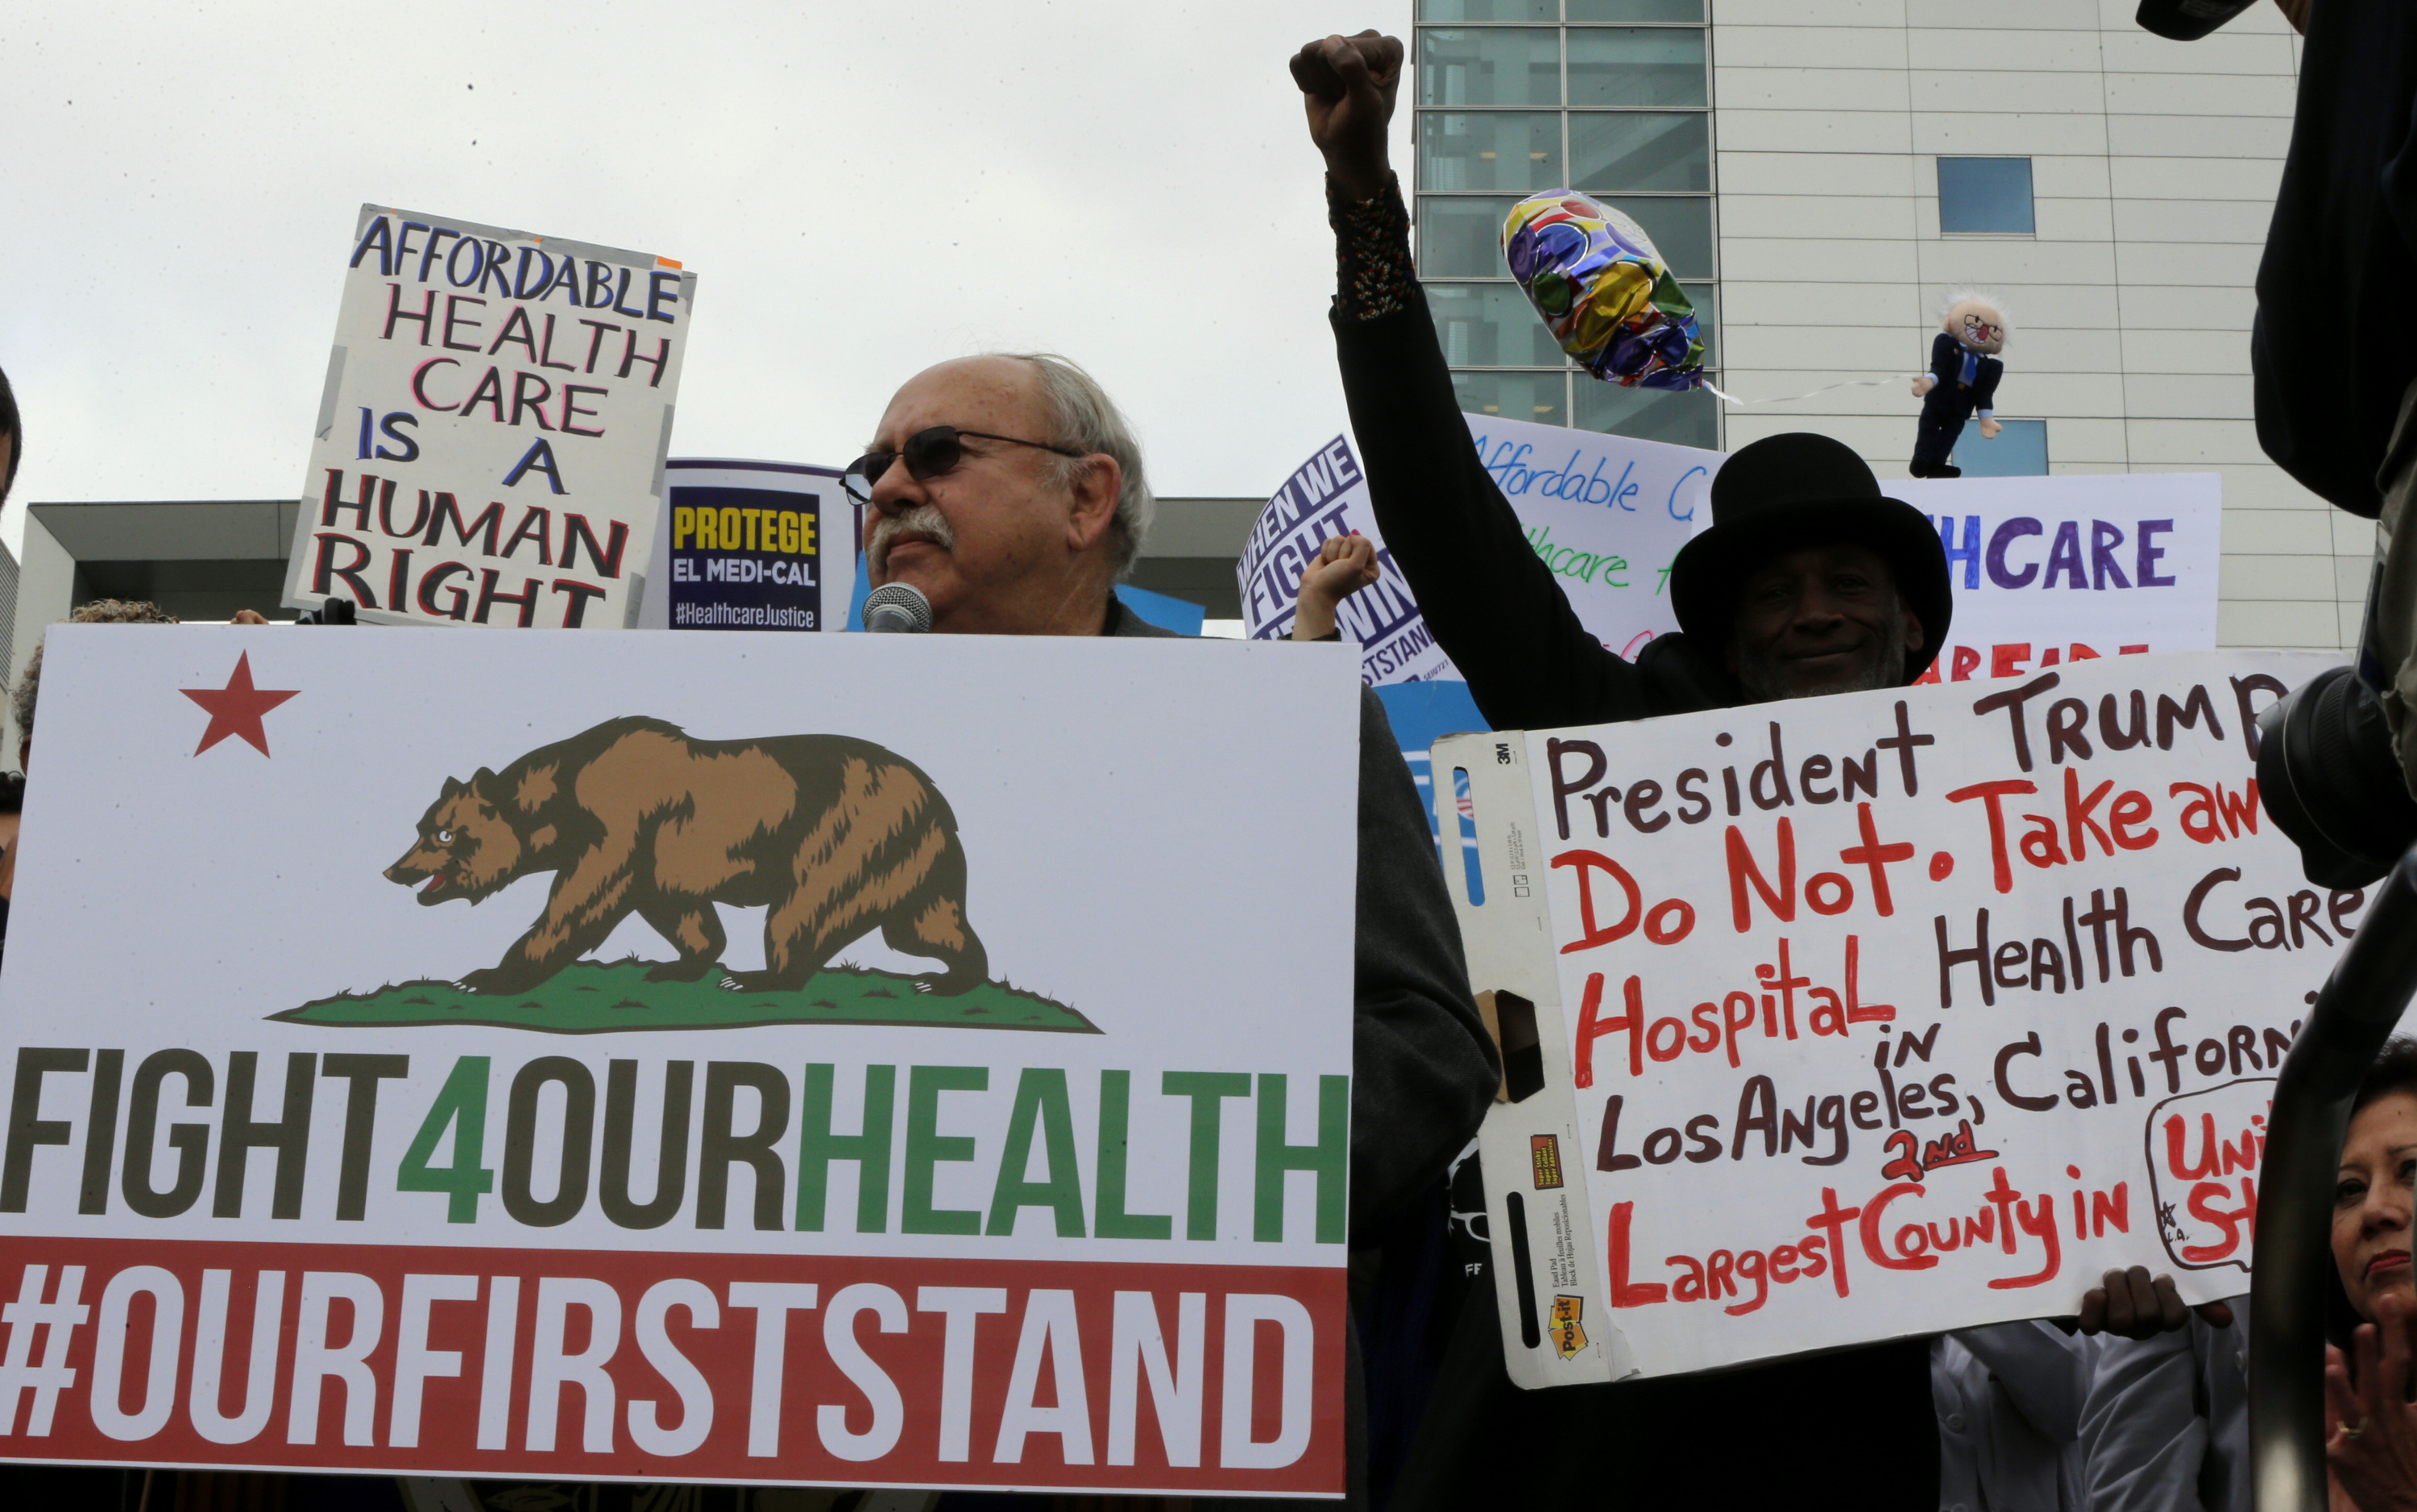 A rally against Republicans proposed changes health care changes in AC+USC Medical Center in Los Angeles Sunday, Jan. 15, 2017. (AP/Damian Dovarganes)